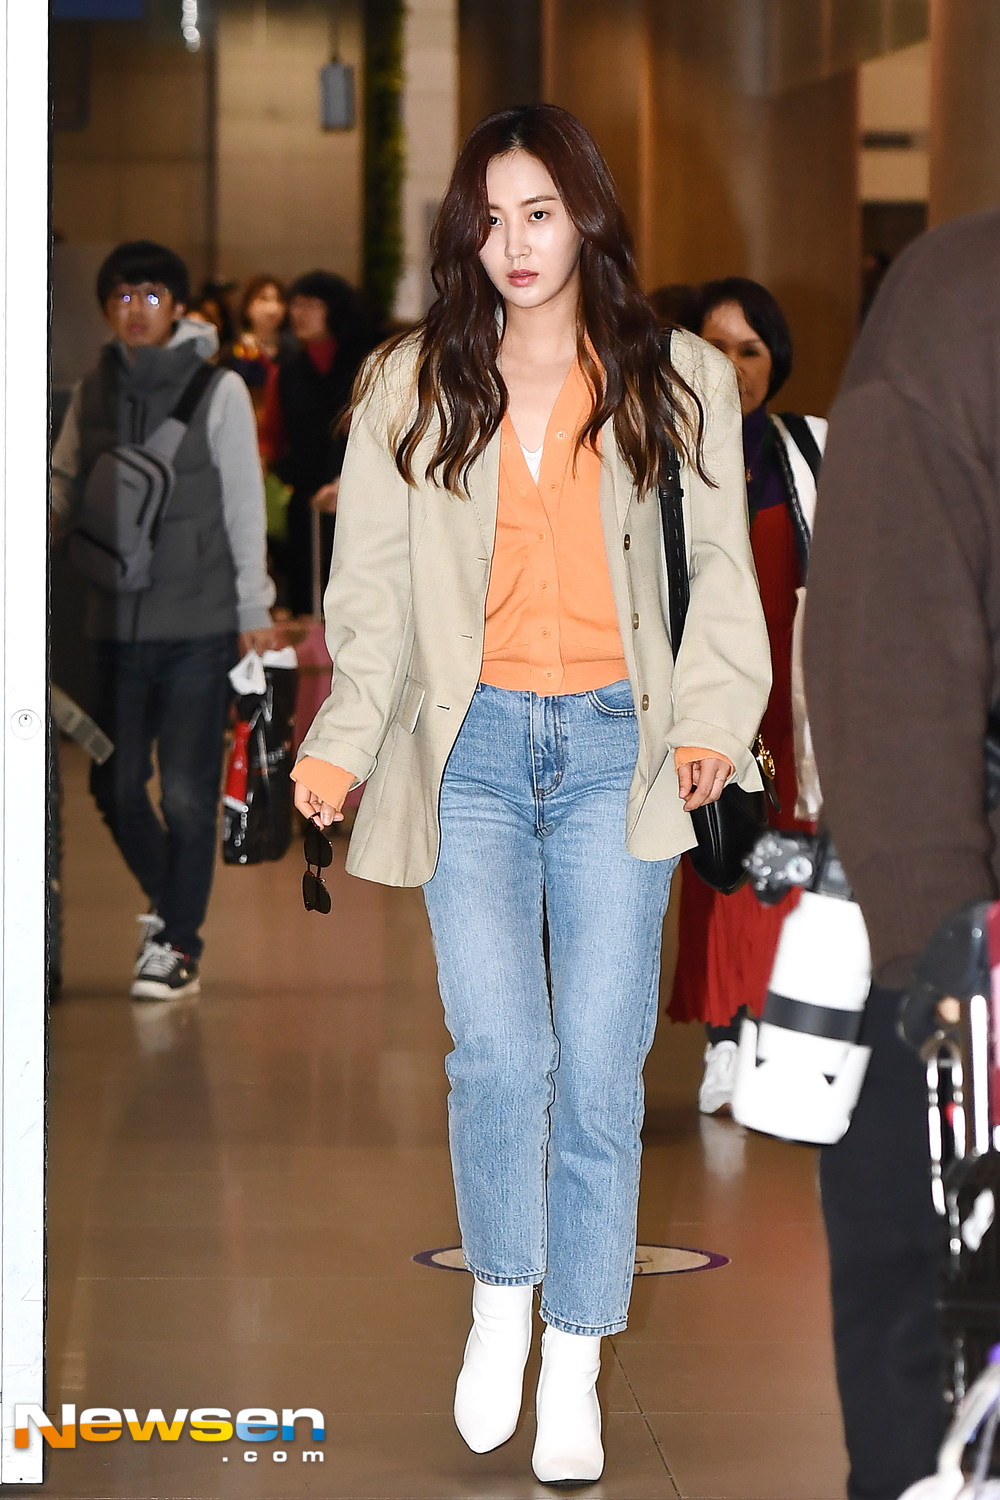 Girls Generation (SNSD) member and actor Kwon Yuri arrived at the Incheon International Airport in Unseo-dong, Jung-gu, Incheon on the afternoon of March 11 after completing the YURI 1st Fanmeeting Tour INTO YURI in Taipei schedule.exponential earthquake